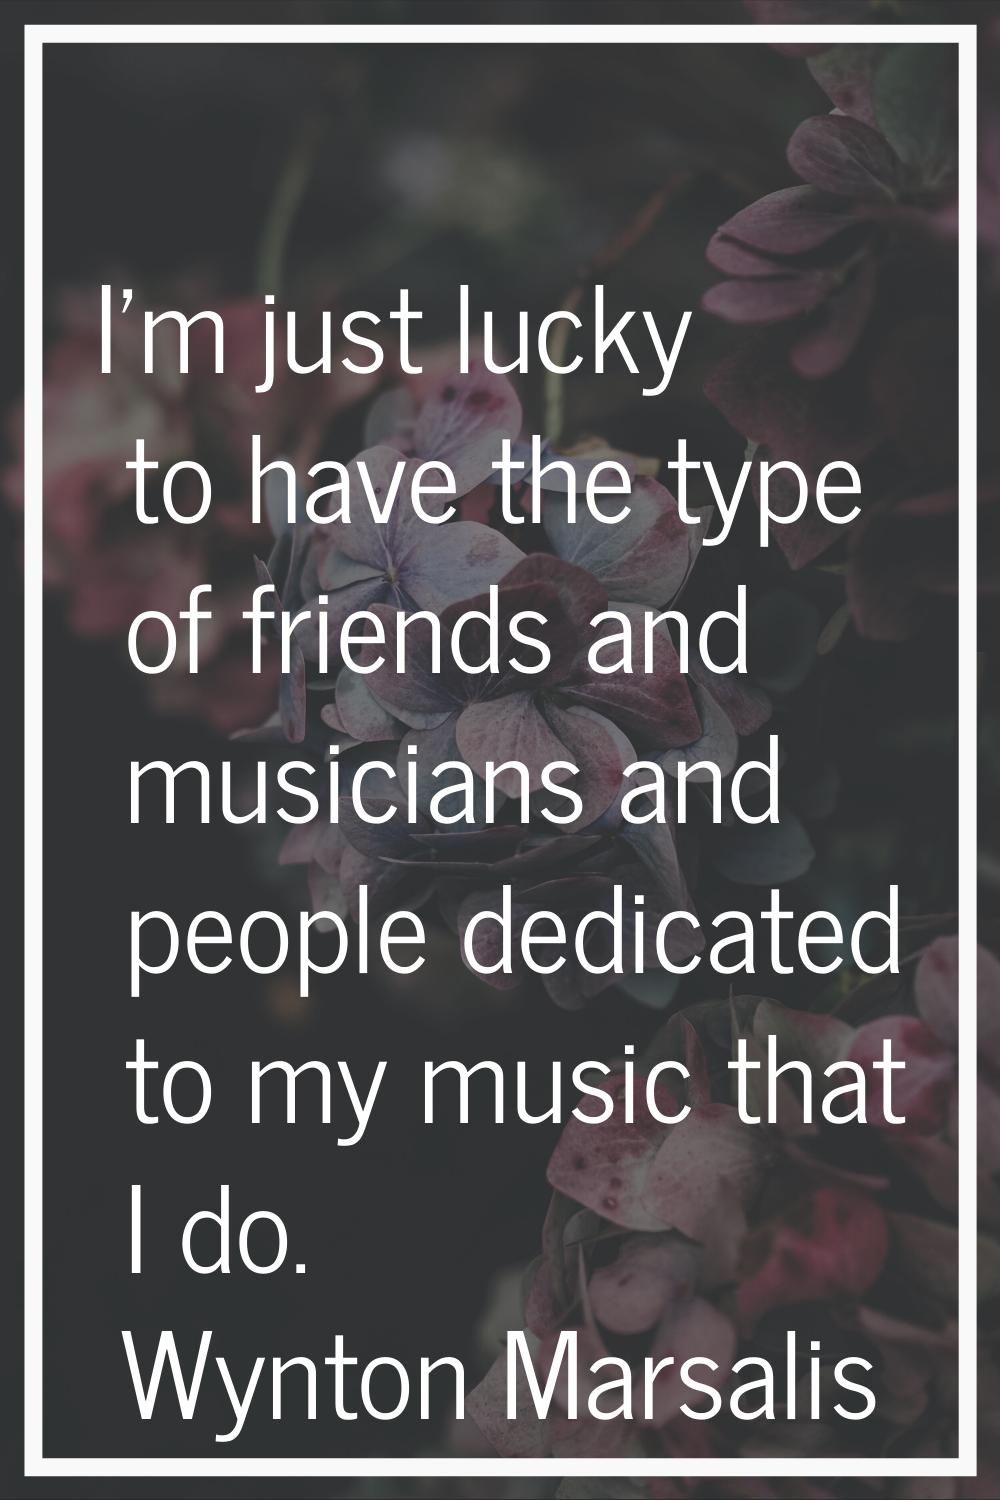 I'm just lucky to have the type of friends and musicians and people dedicated to my music that I do